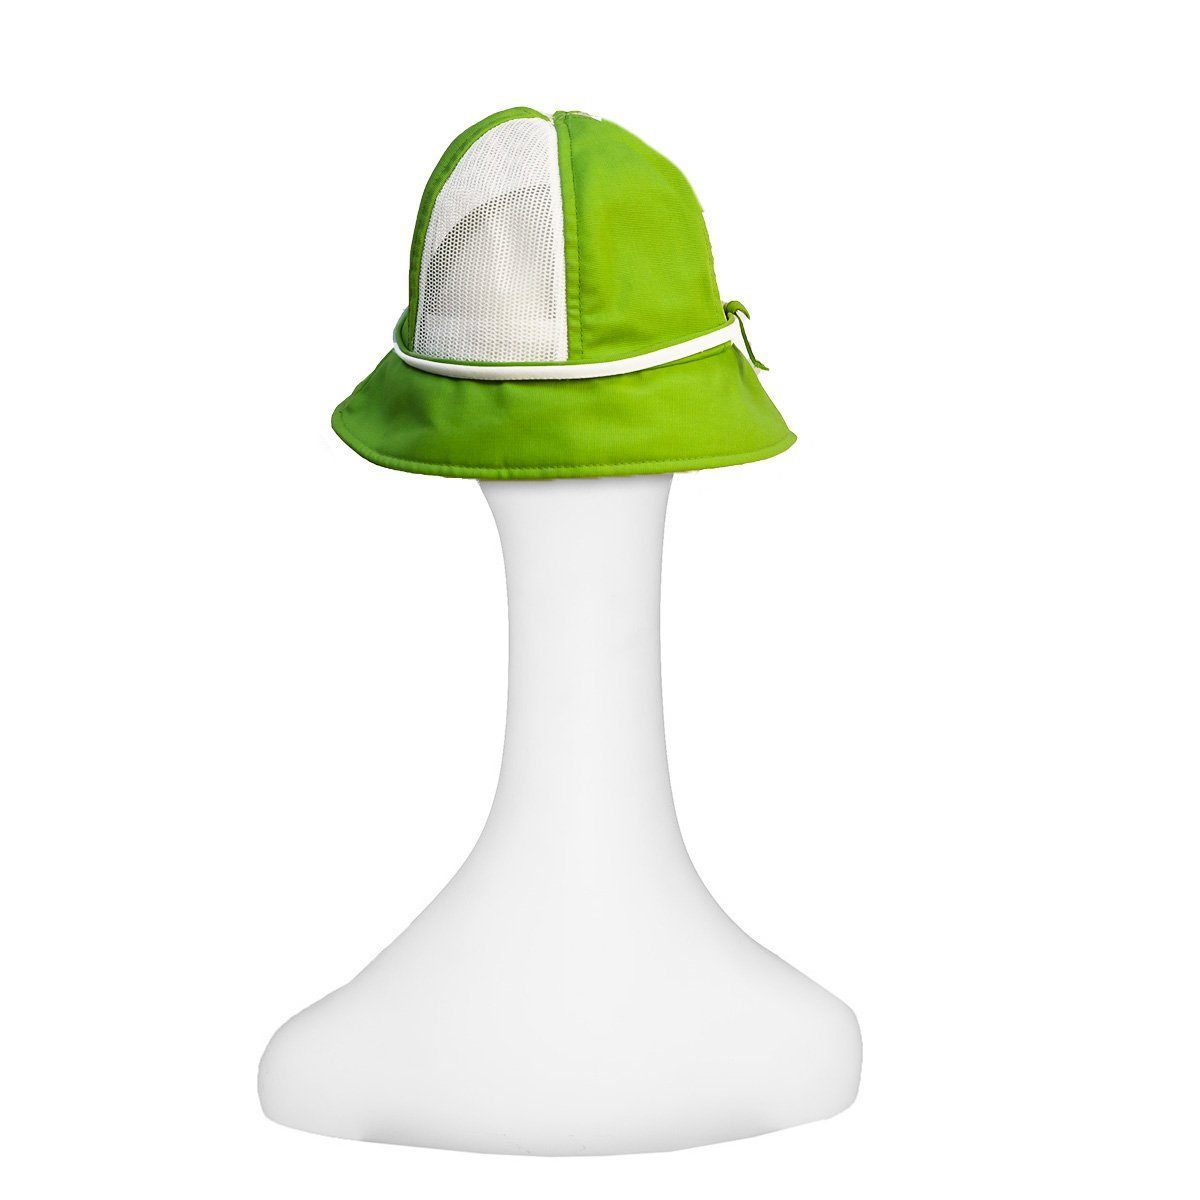 Vintage 70s Bright Green Golf - Tennis Hat by Happy Cappers